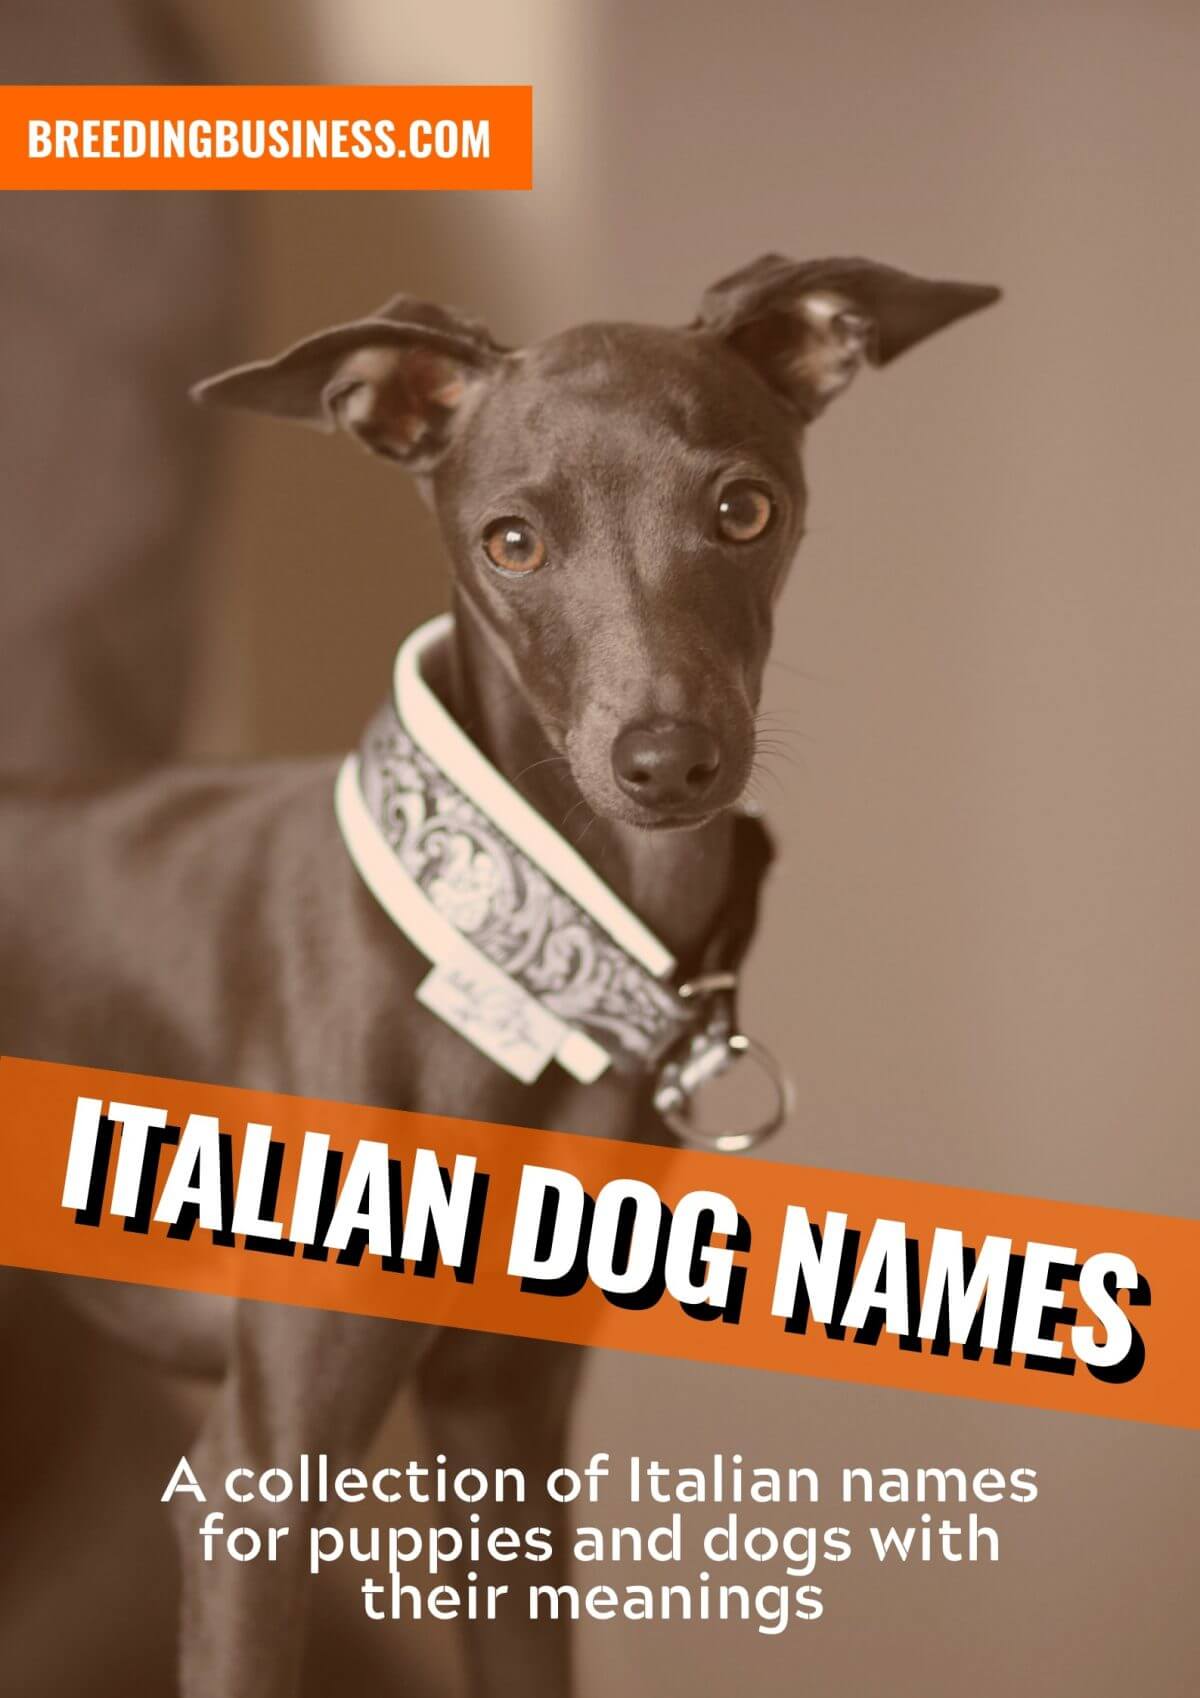 125+ Italian Dog Names – From Italian Culture, Geography, Food